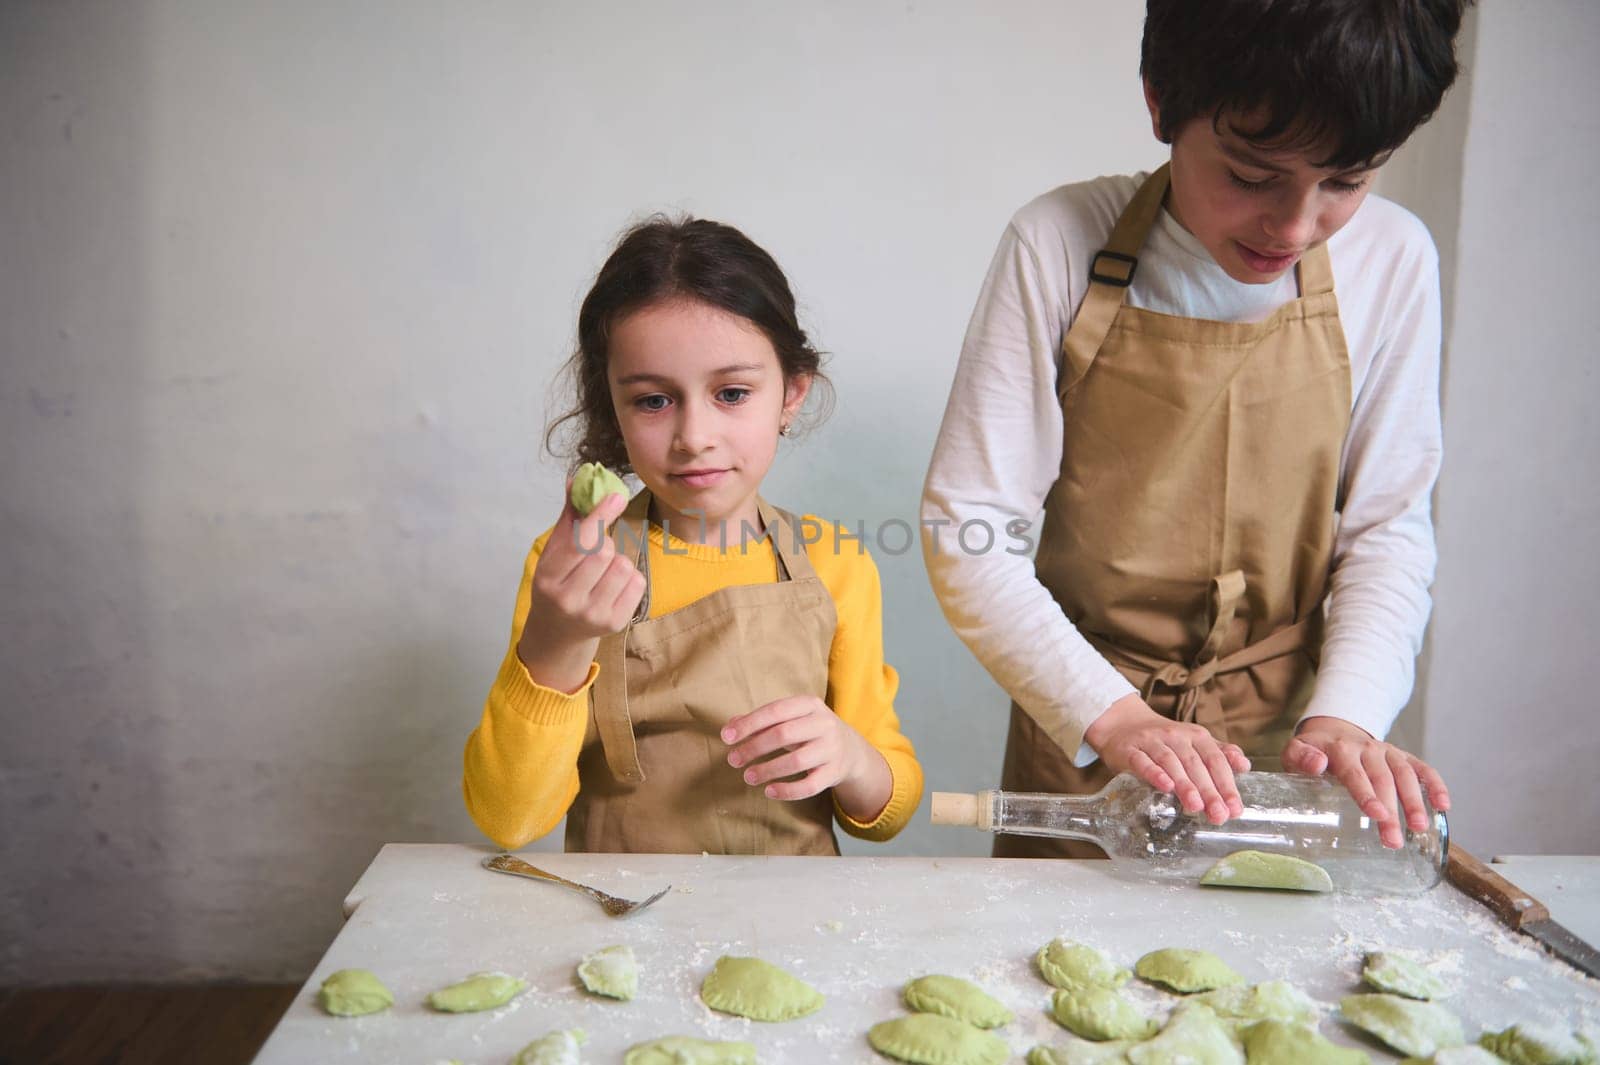 Cute little girl stuffing and molding dough while her brother using wine bottle as rolling pin, rolling out a raw green dough. Kids making ravioli, varennyki, pelmeni against white wall background by artgf